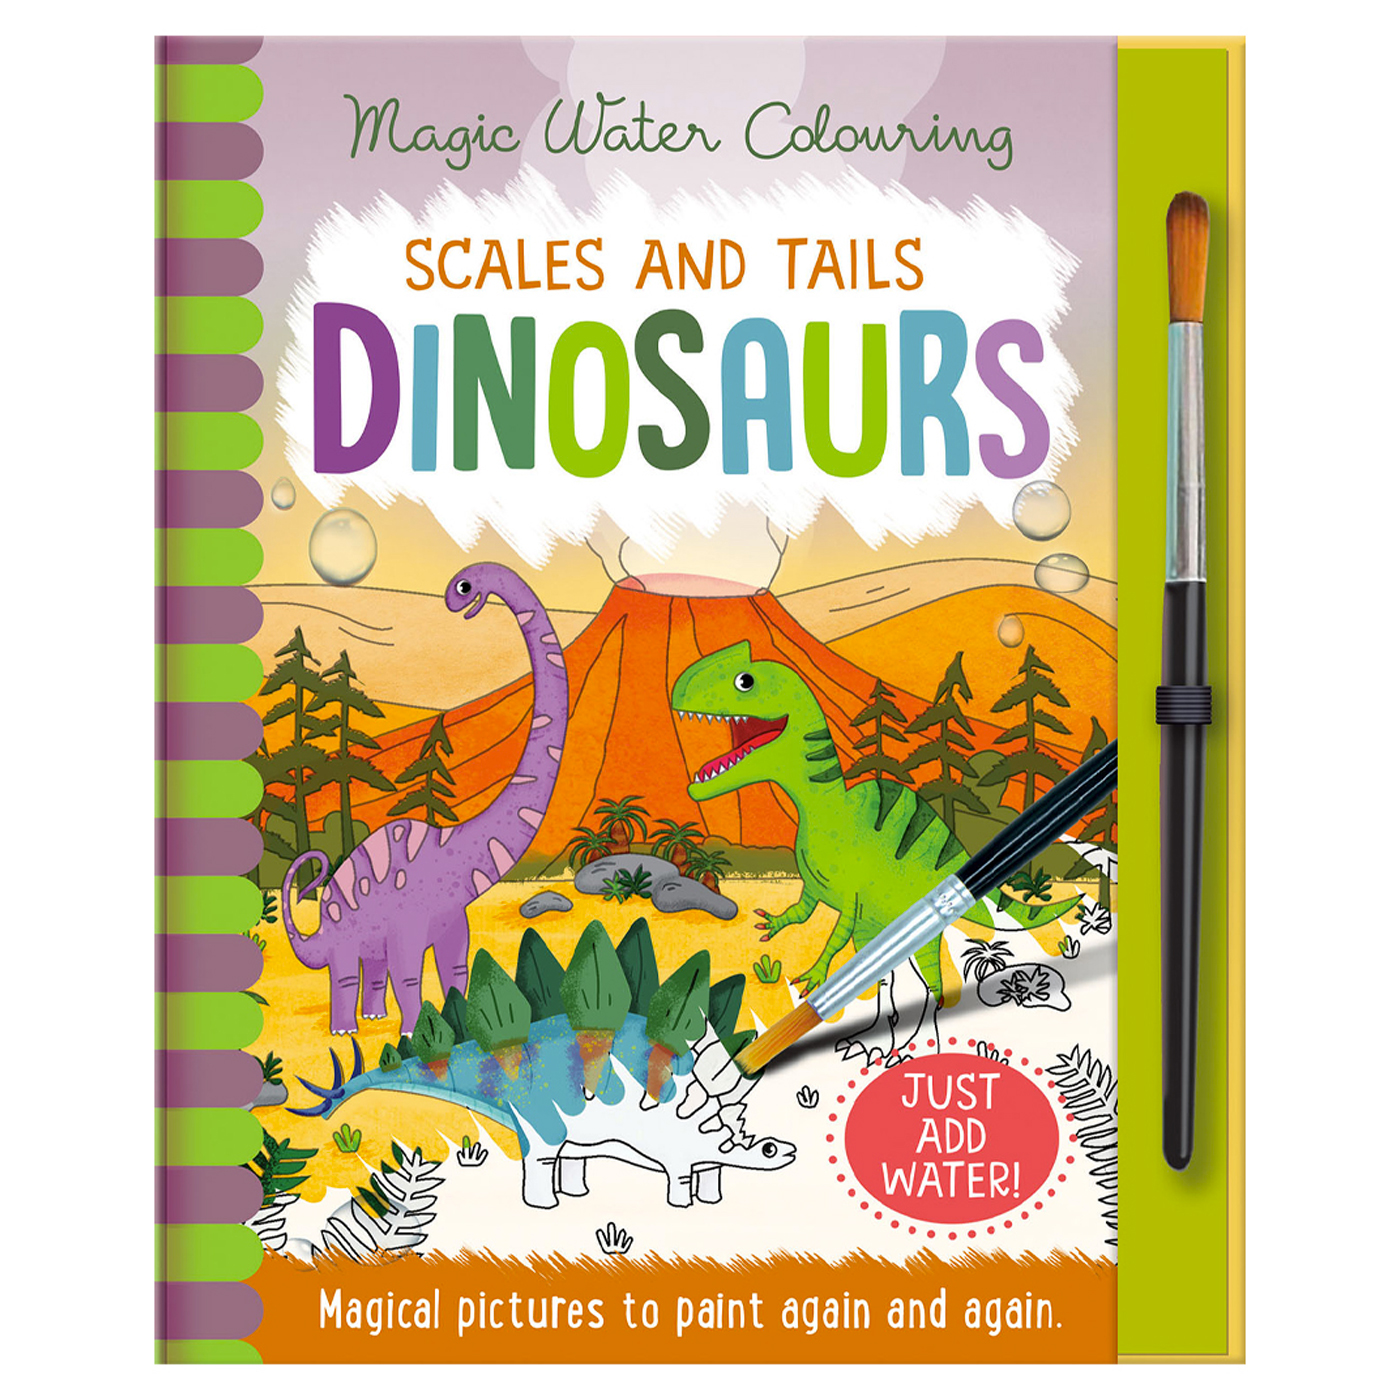  Magic Water Colouring: Scales and Tails Dinosaurs